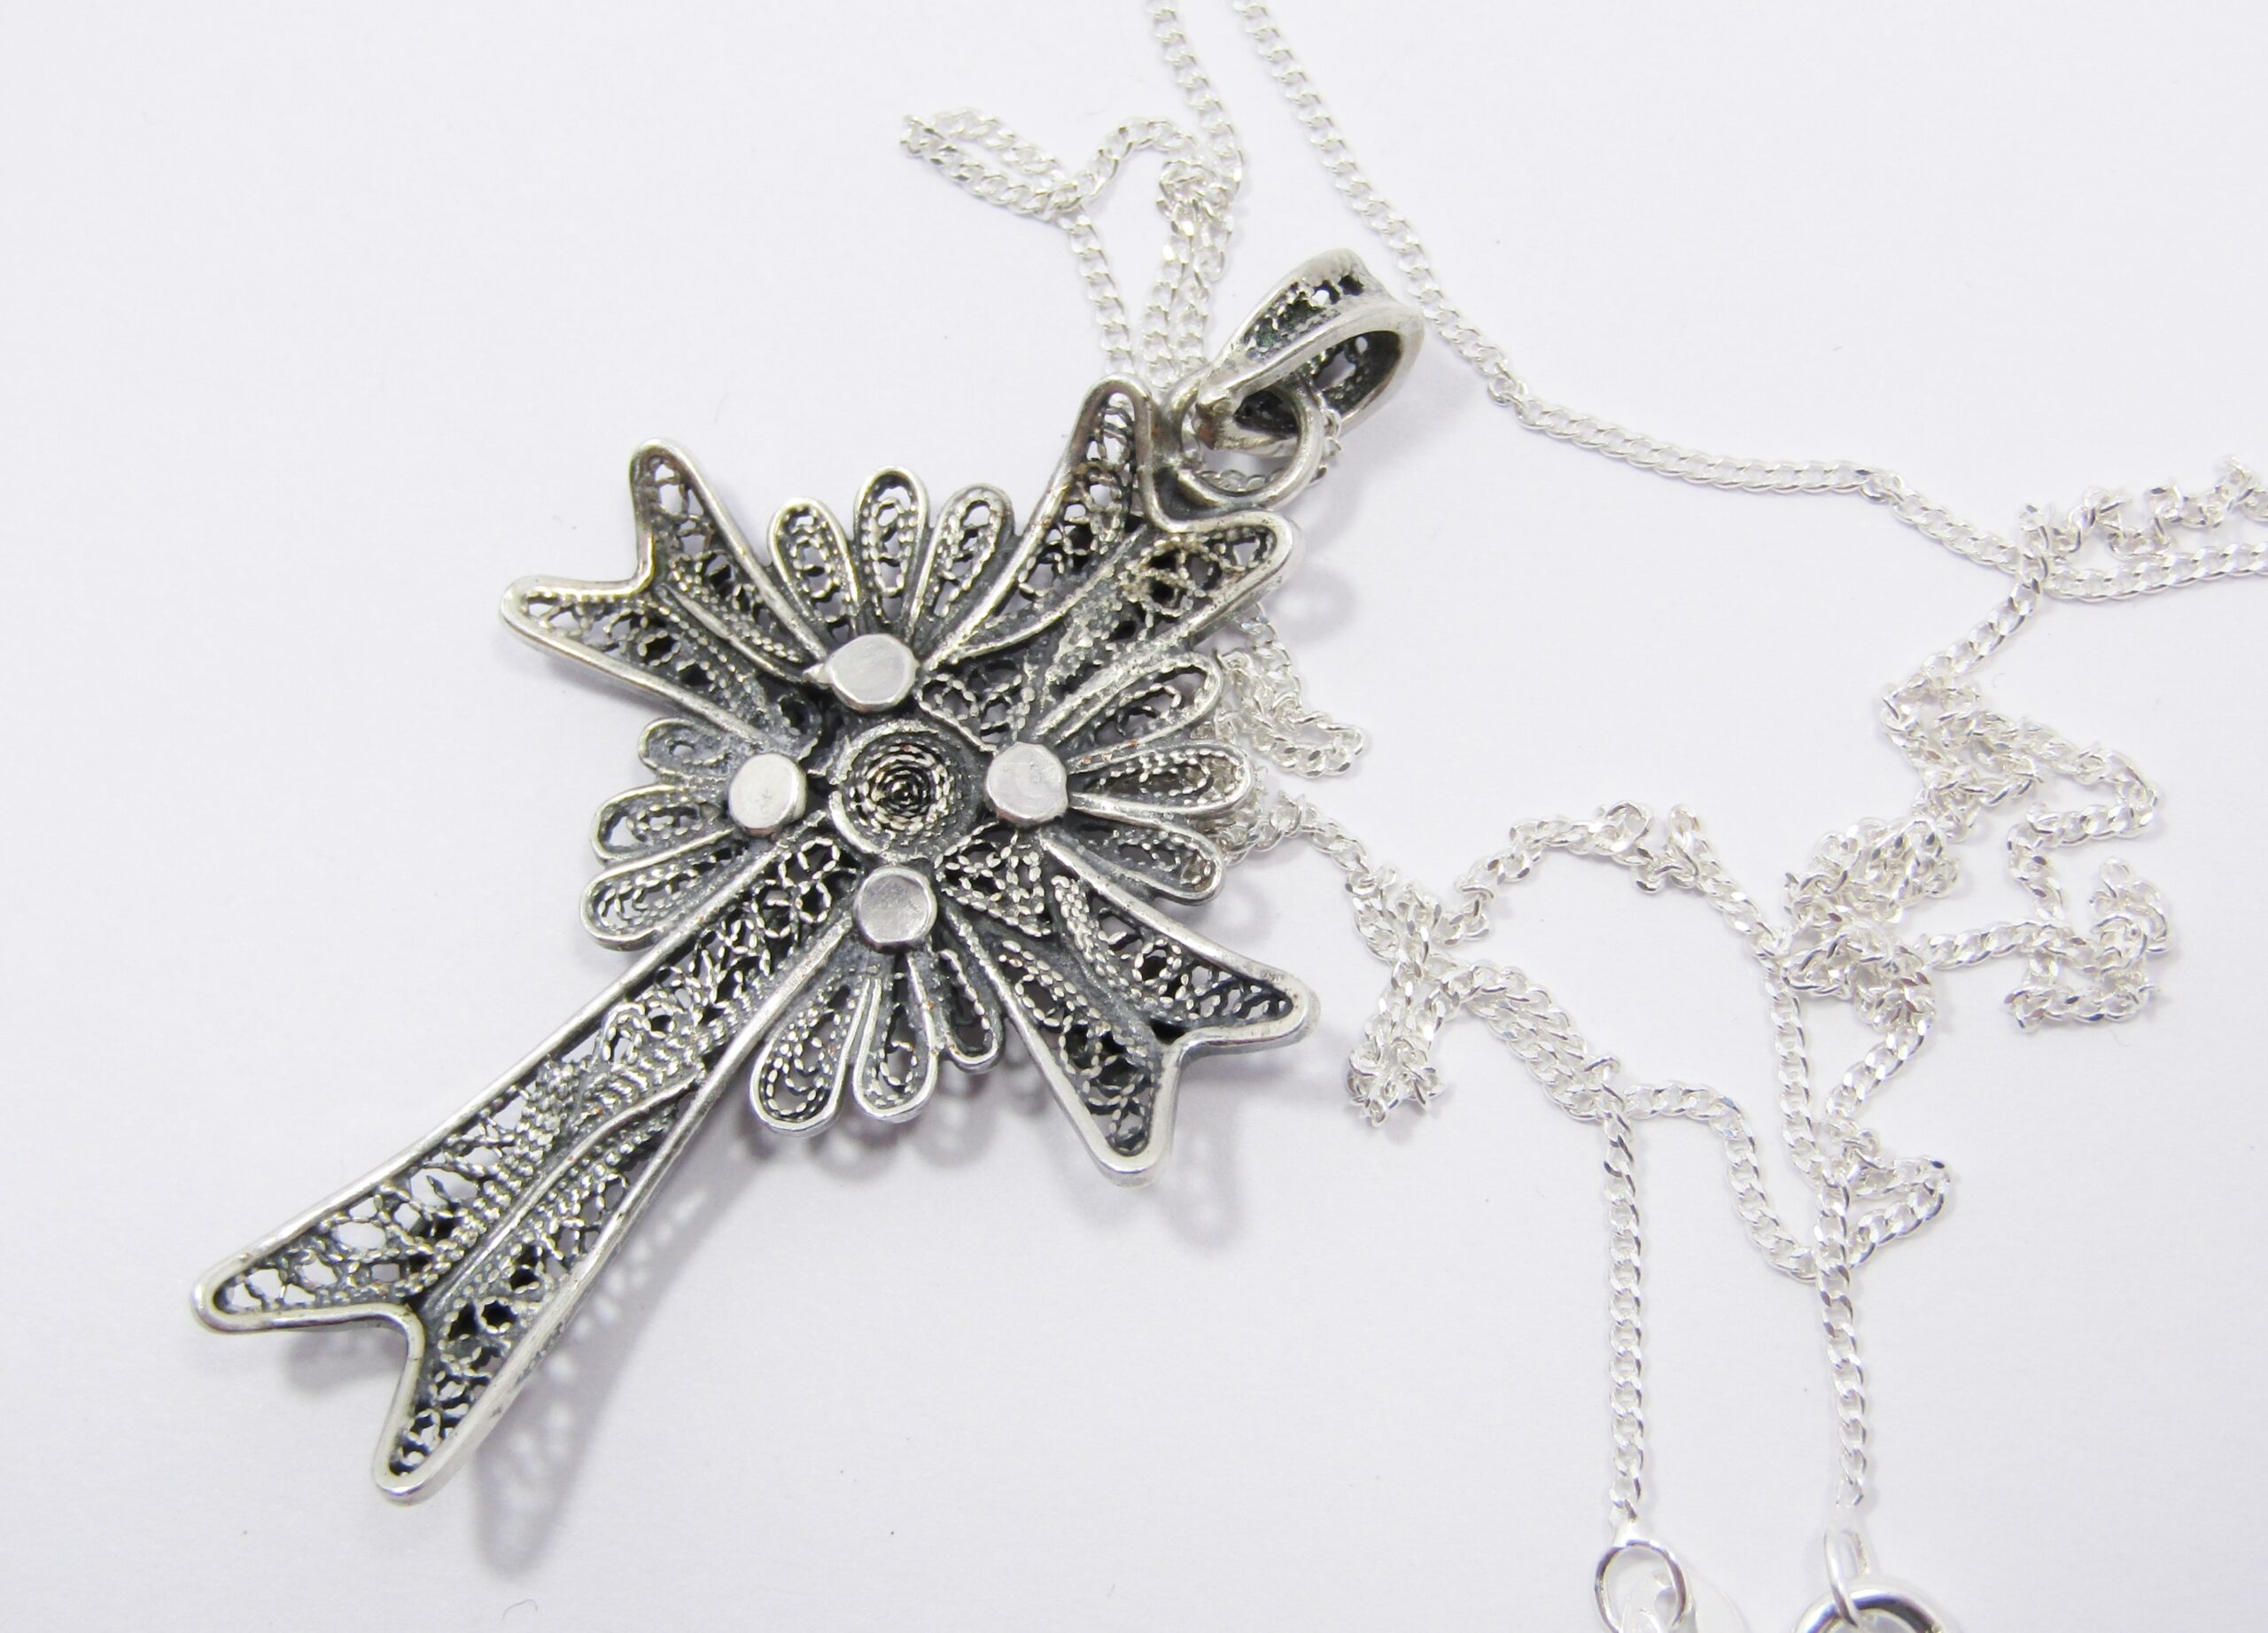 A Gorgeous Detailed Crucifix Pendant On Chain in Sterling Silver.